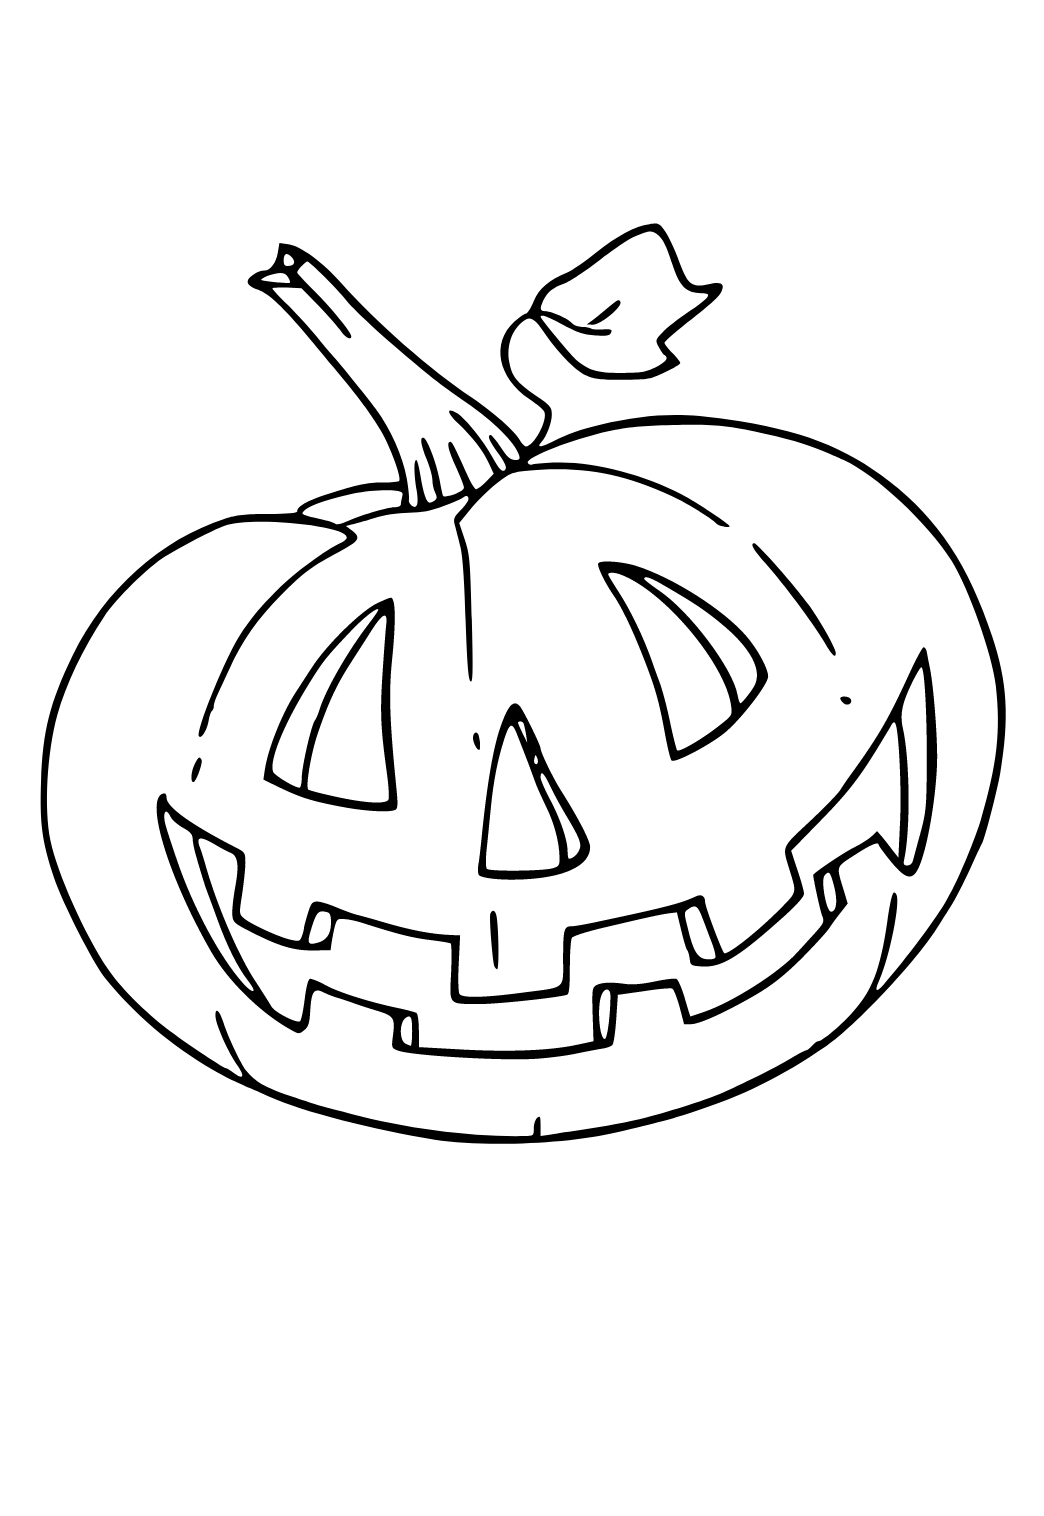 Free printable pumpkin head coloring page for adults and kids